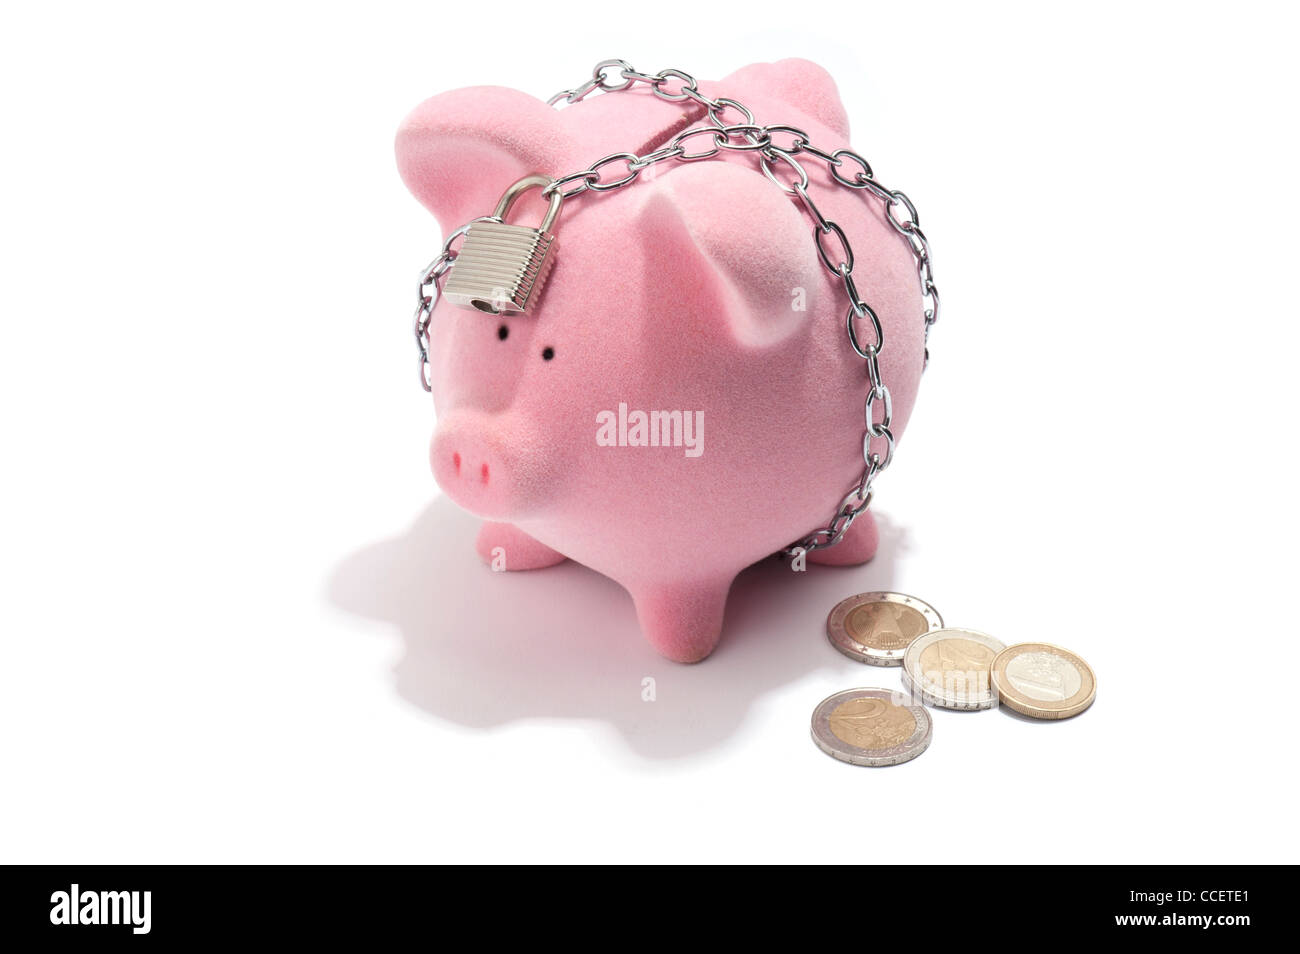 A chained and padlocked piggy bank with Euro coins next to it Stock Photo